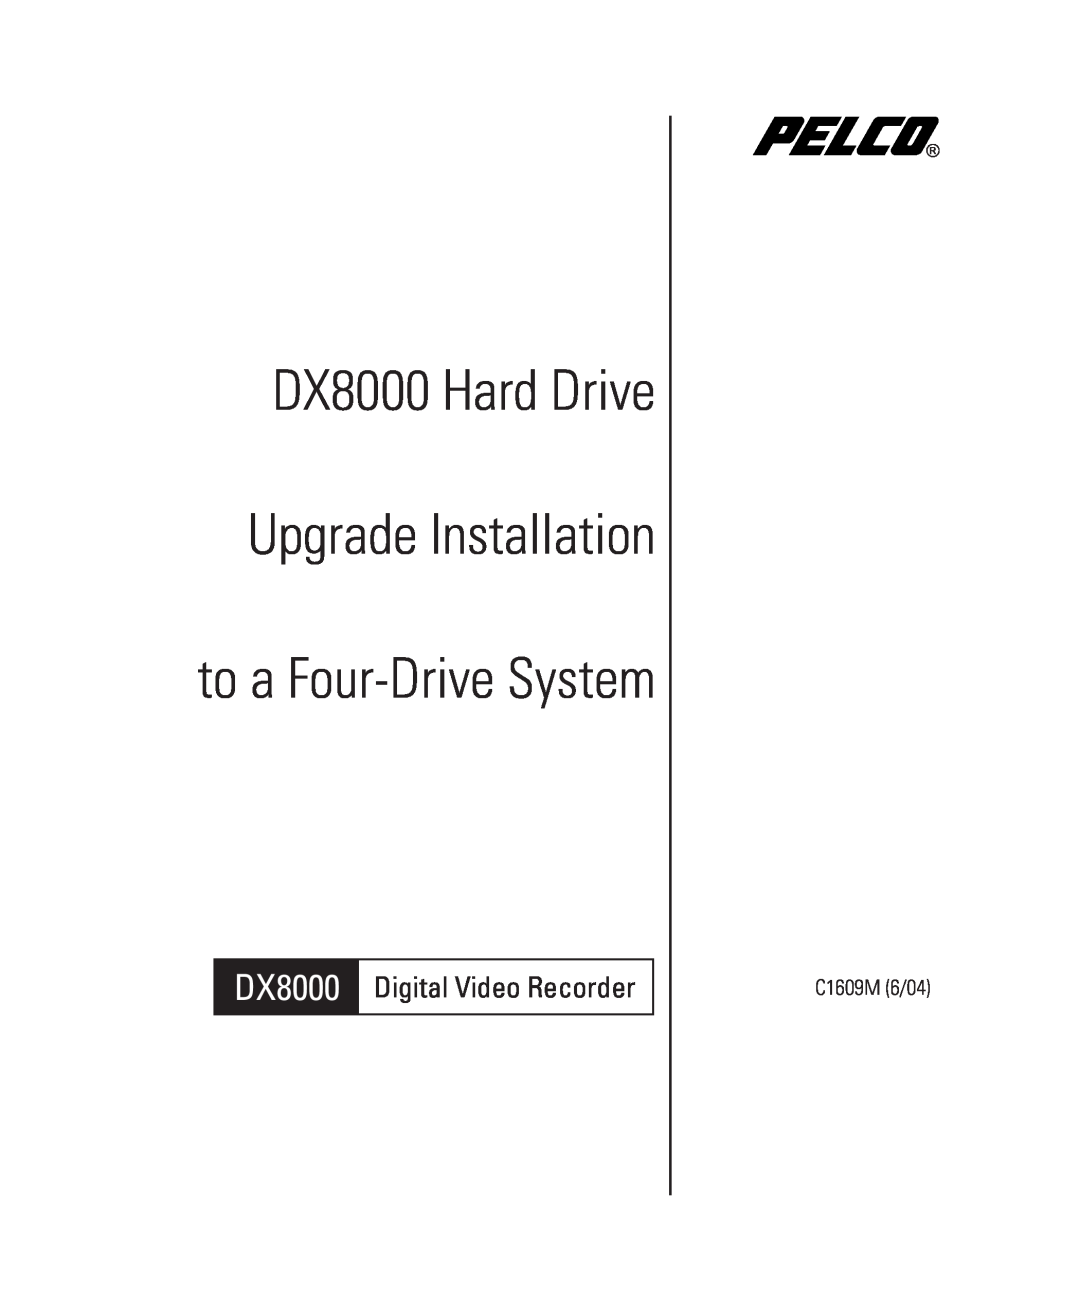 Pelco Dx8000, dx8100 manual Tech Tips, DX8100 DVR COMPATIBILITY WITH THE DX8000, COMPATIBILITY - DX8000 vs. DX8100 